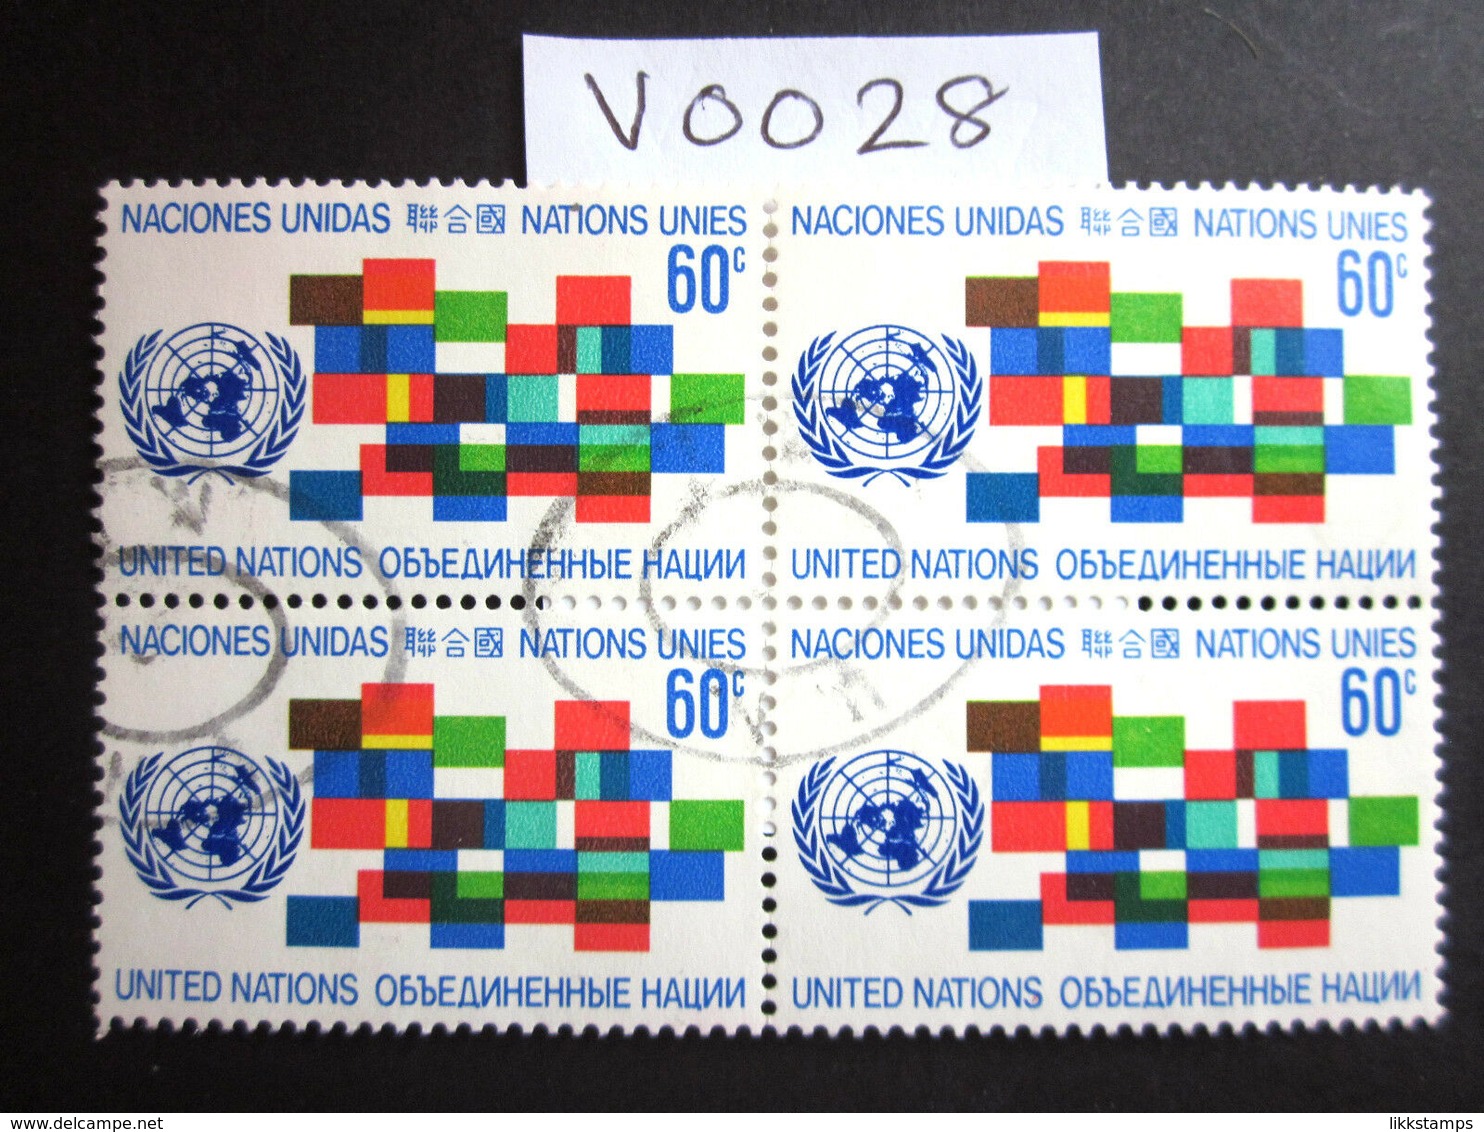 1971 A FINE USED BLOCK OF 4 "SG 223" PICTORIAL UNITED NATIONS USED STAMPS ( V0028 ) #00356 - Colecciones & Series